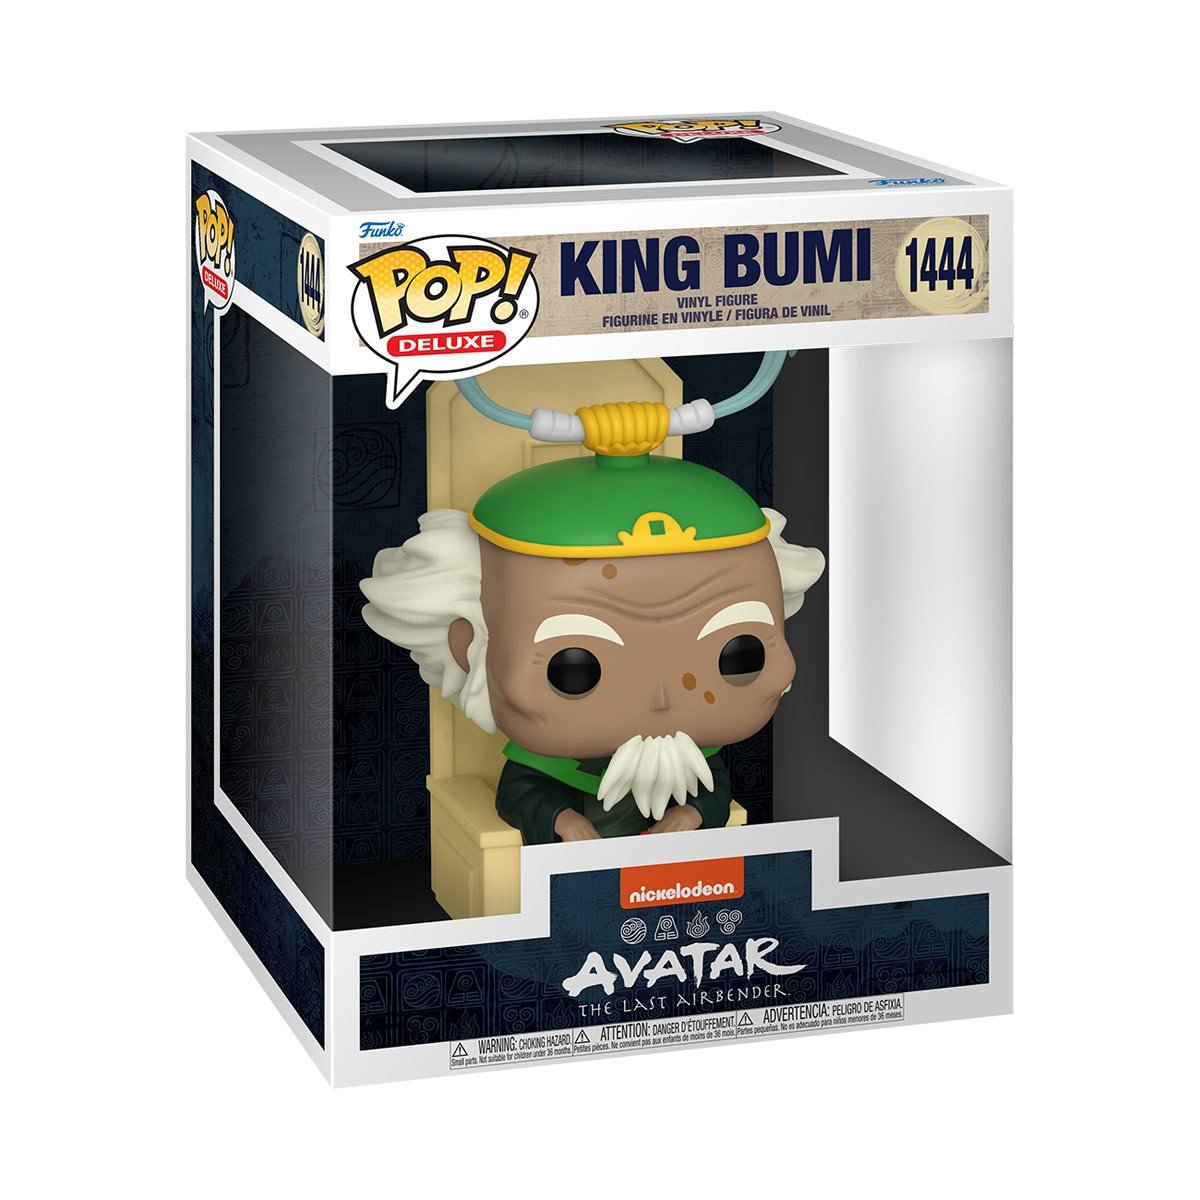 Funko - Pop! Avatar: The Last Airbender King Bumi Deluxe #1444 - Good Game Anime